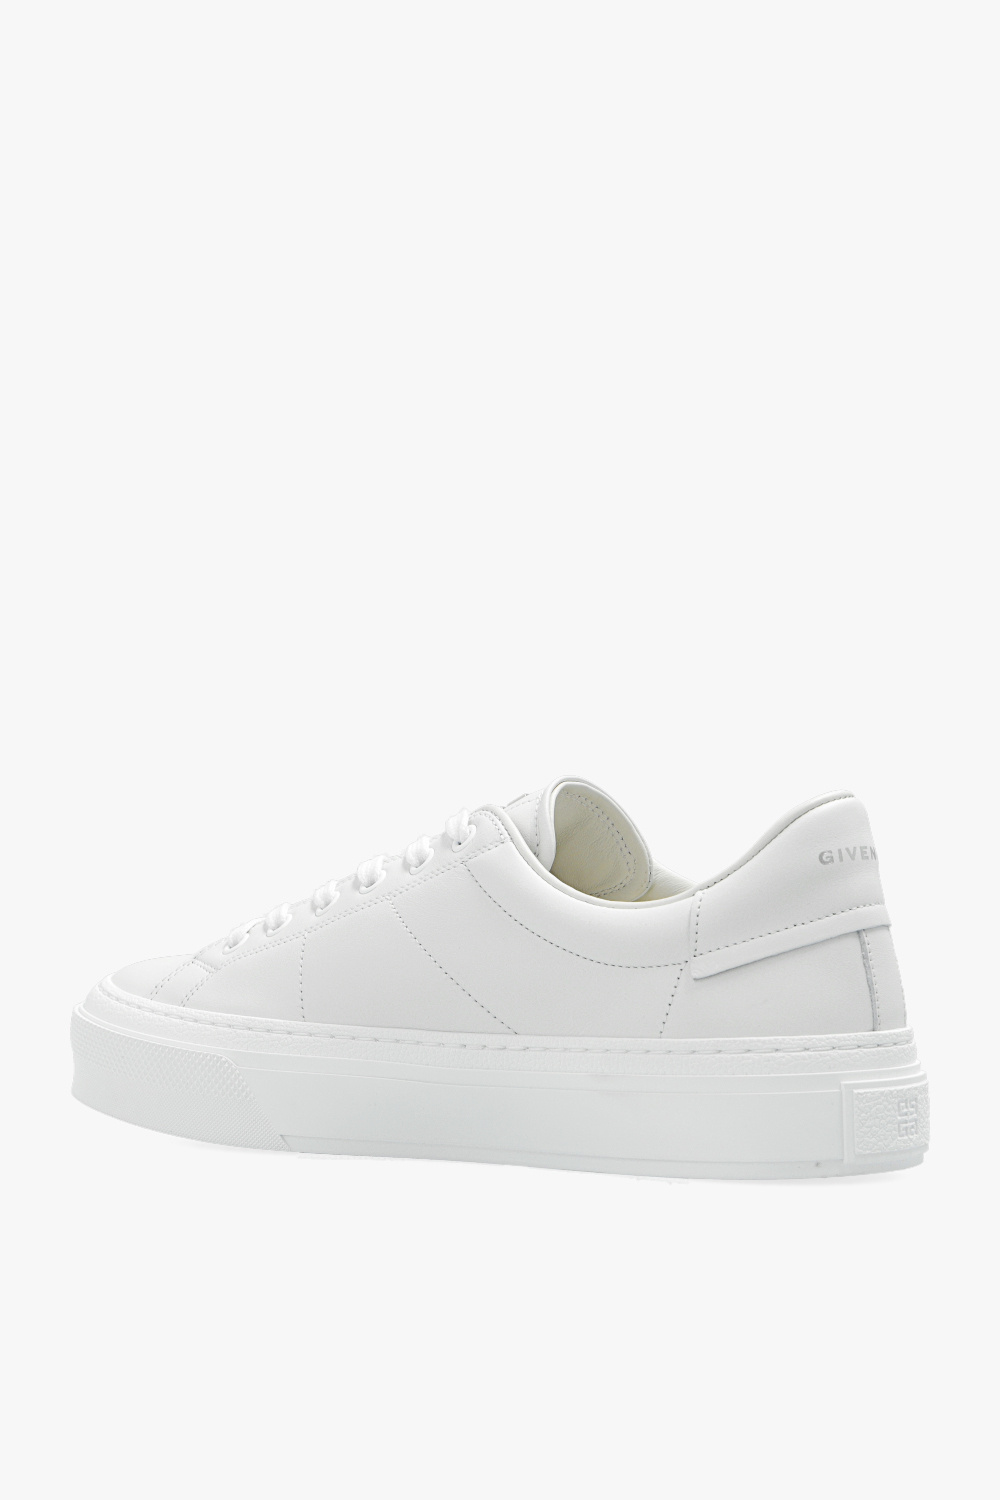 Givenchy 'City' sneakers | Women's Shoes | Vitkac